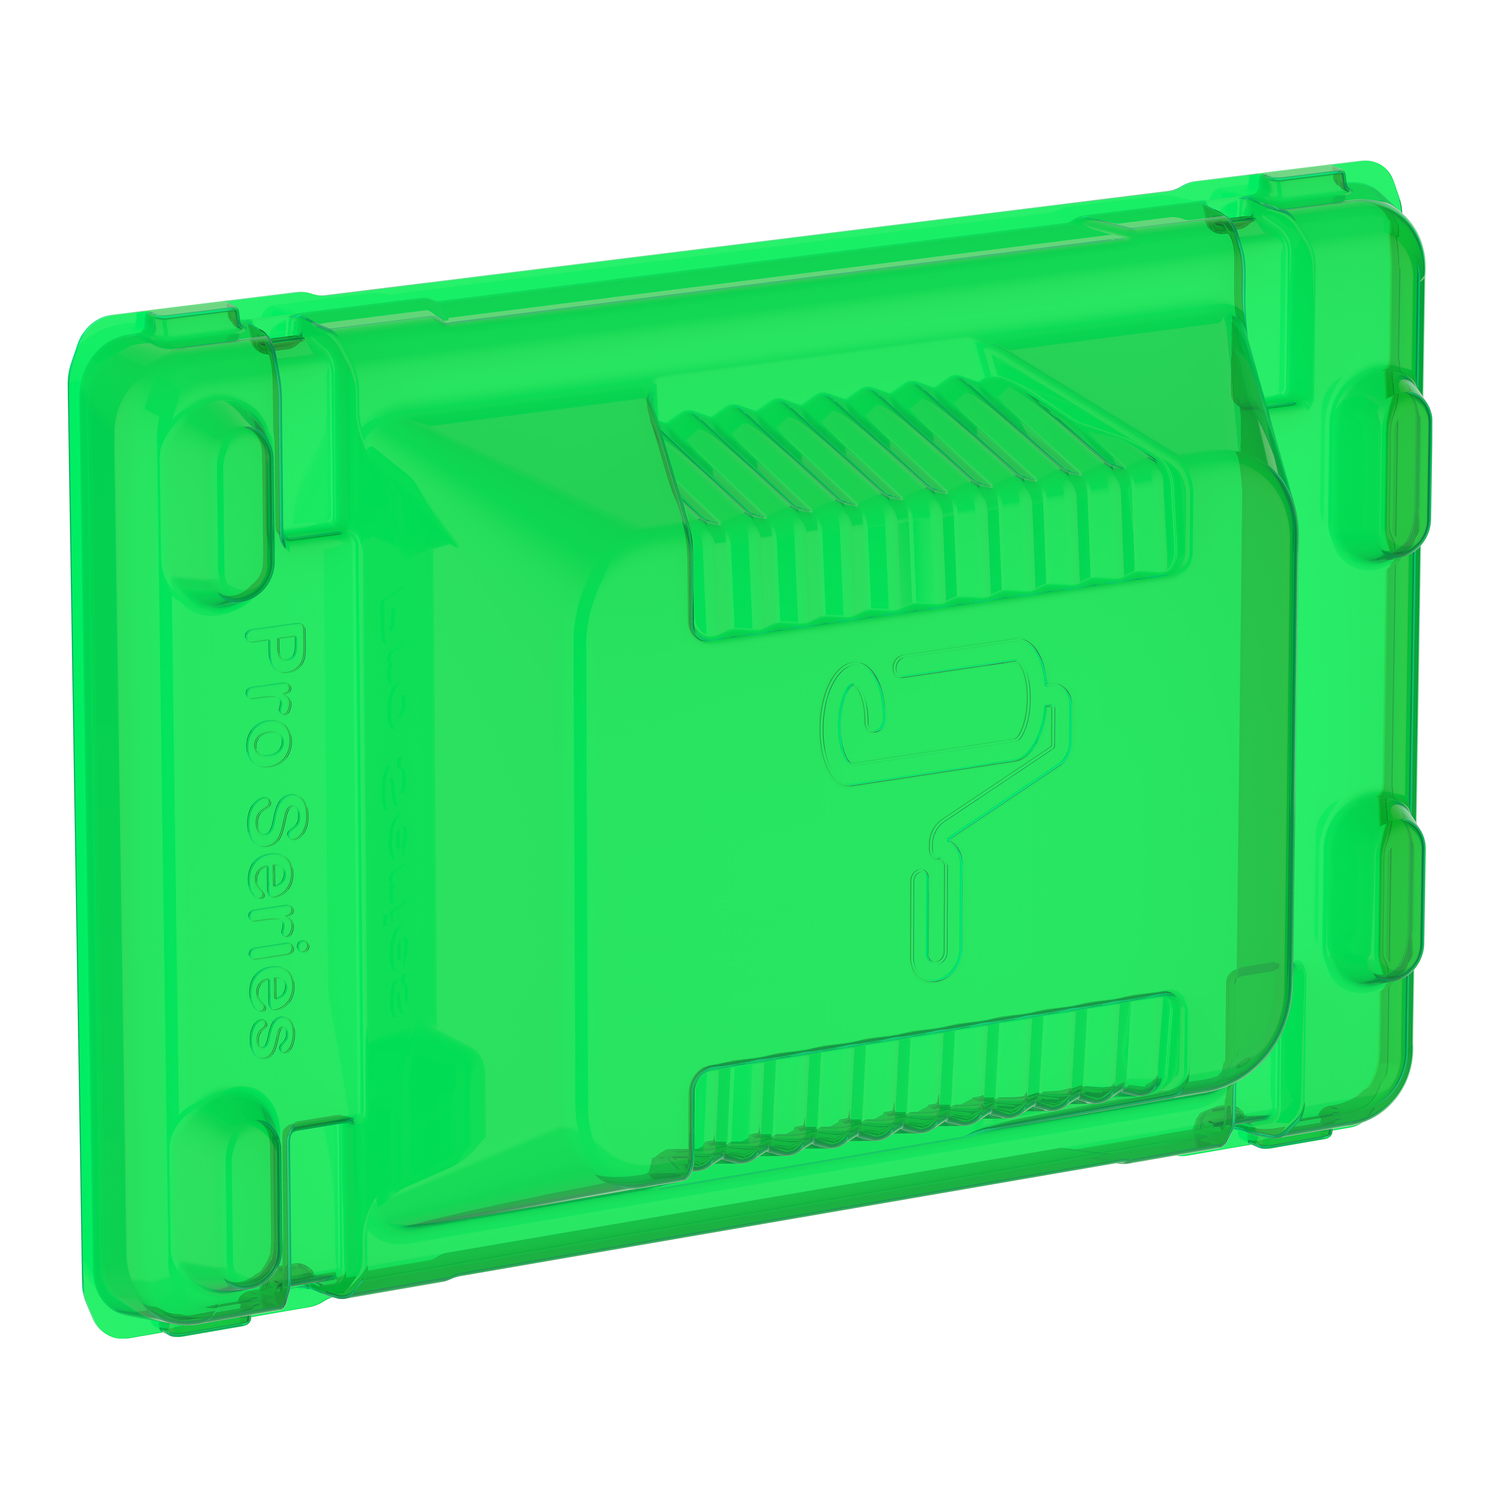 PDL Iconic - Protective Paint Cover 120x78mm plates 50-Pack - Green